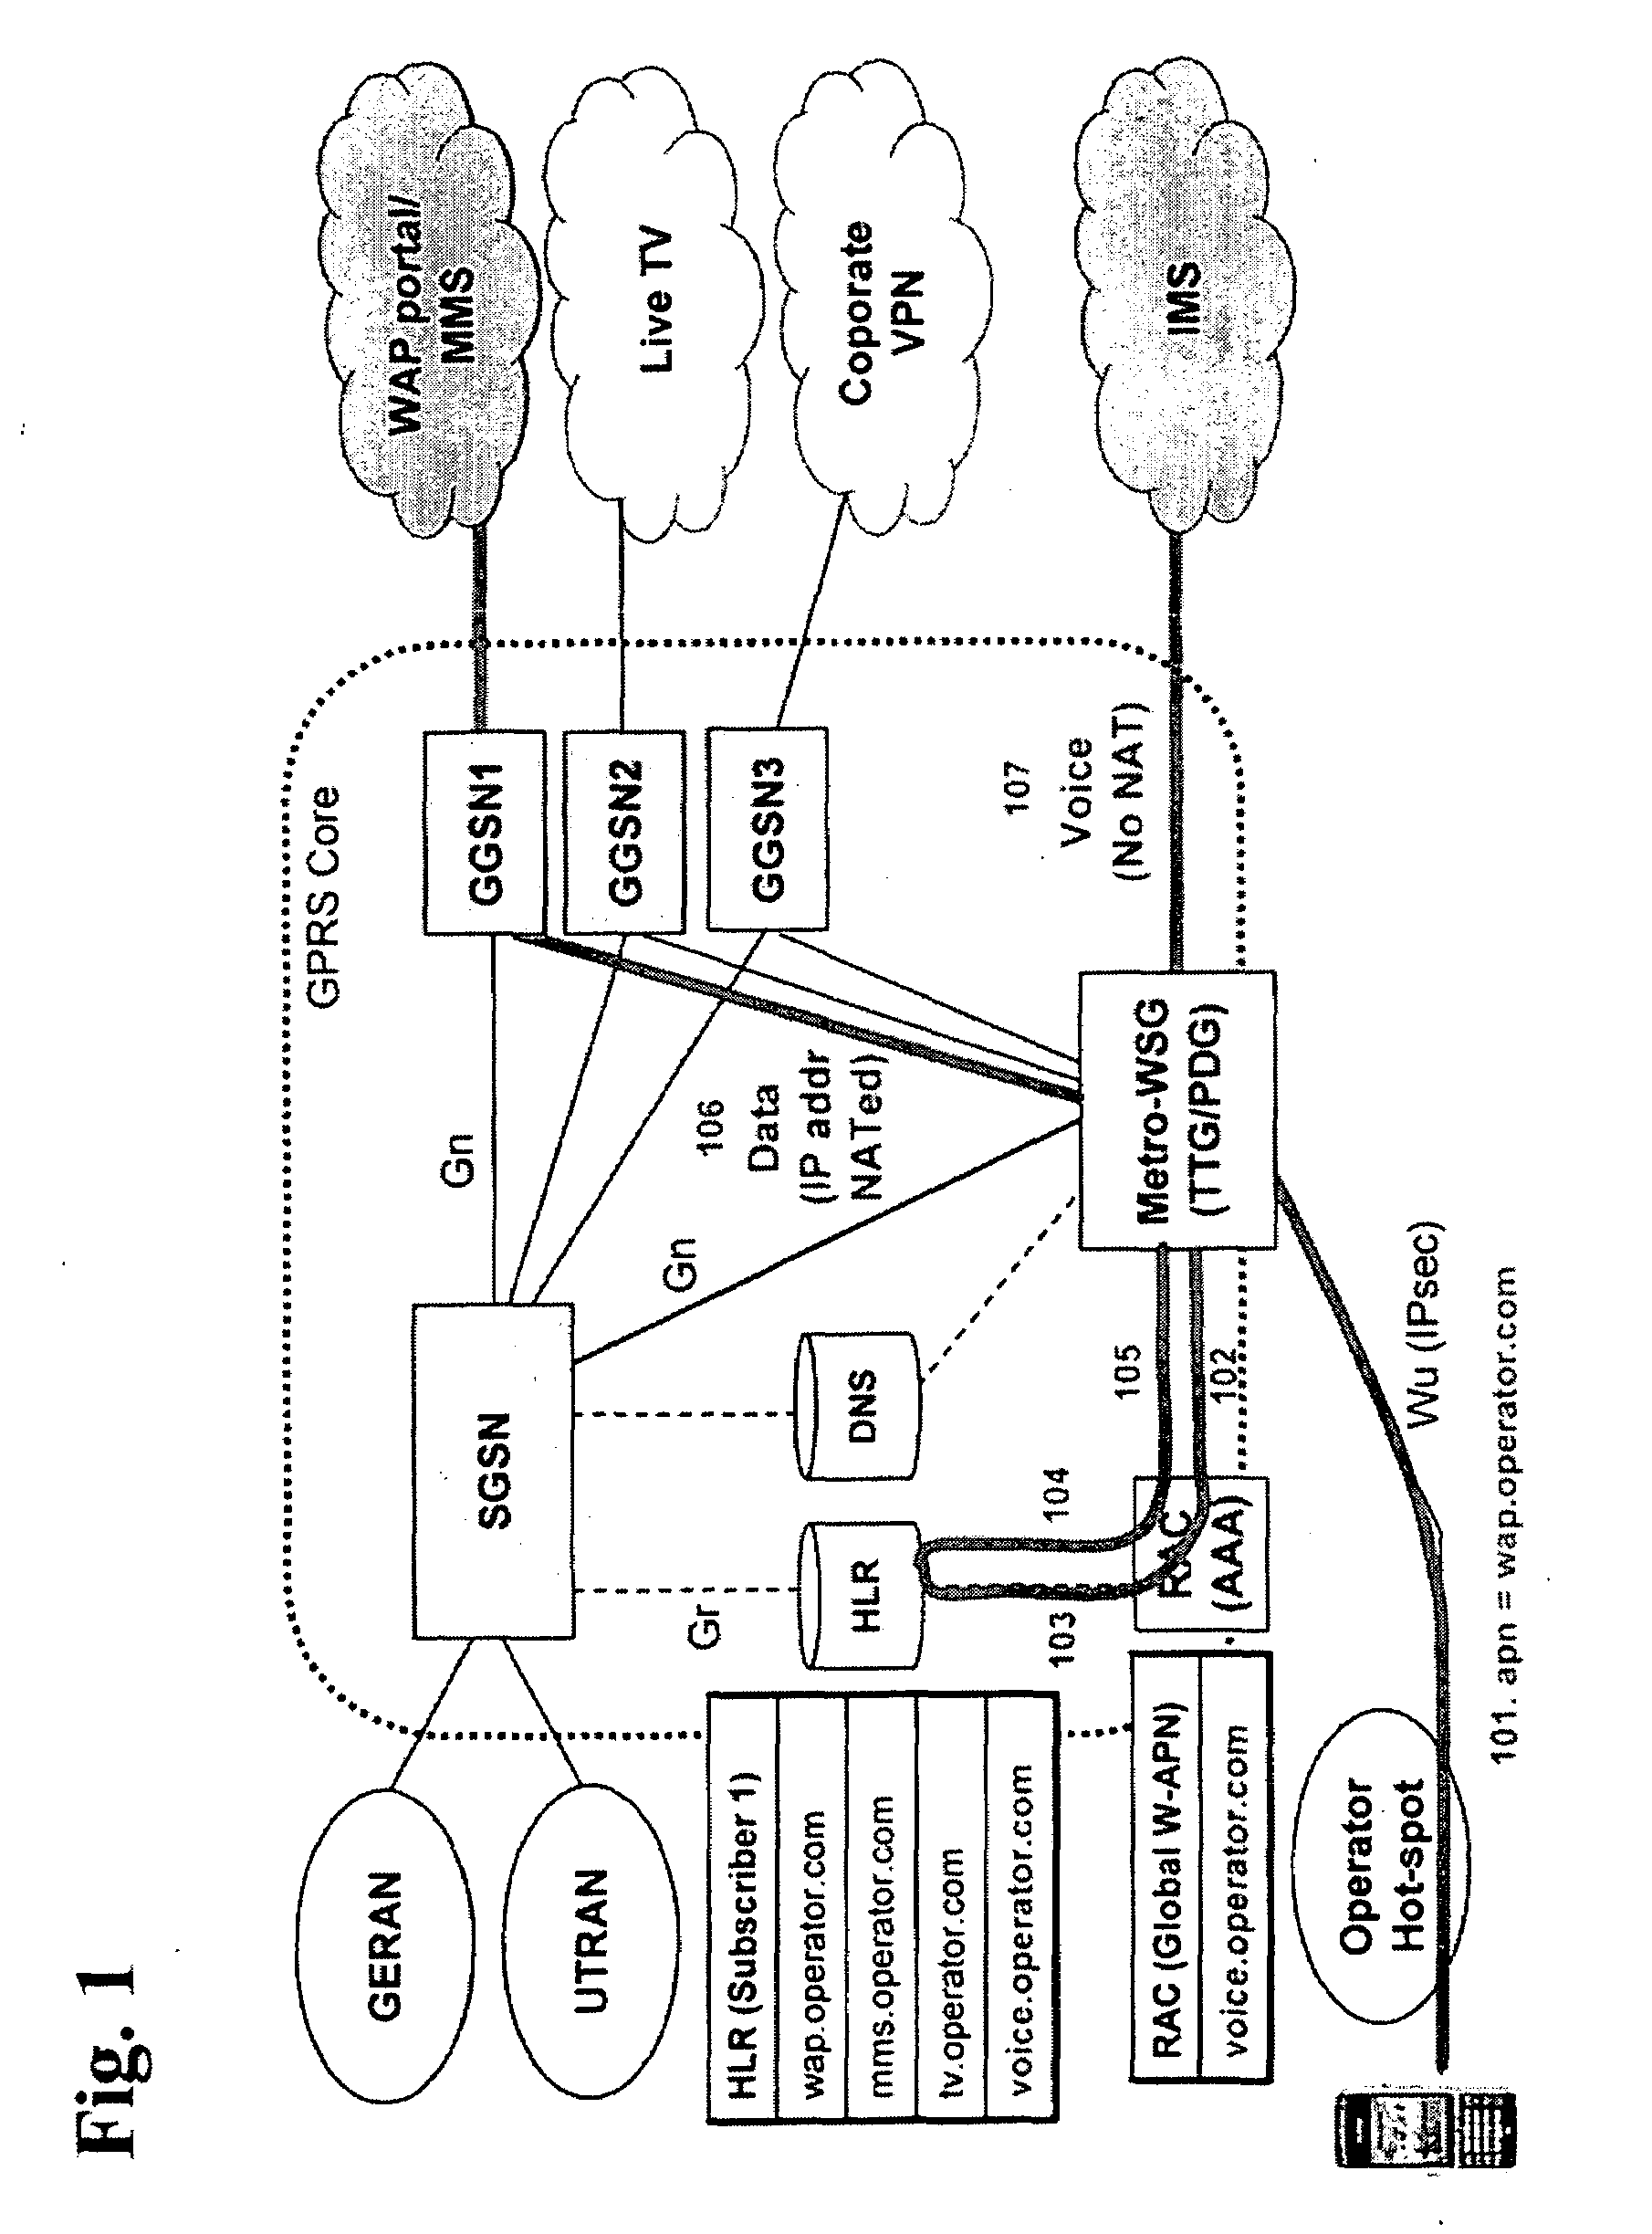 Methods and systems for providing multiple media streams in a hybrid wireless network